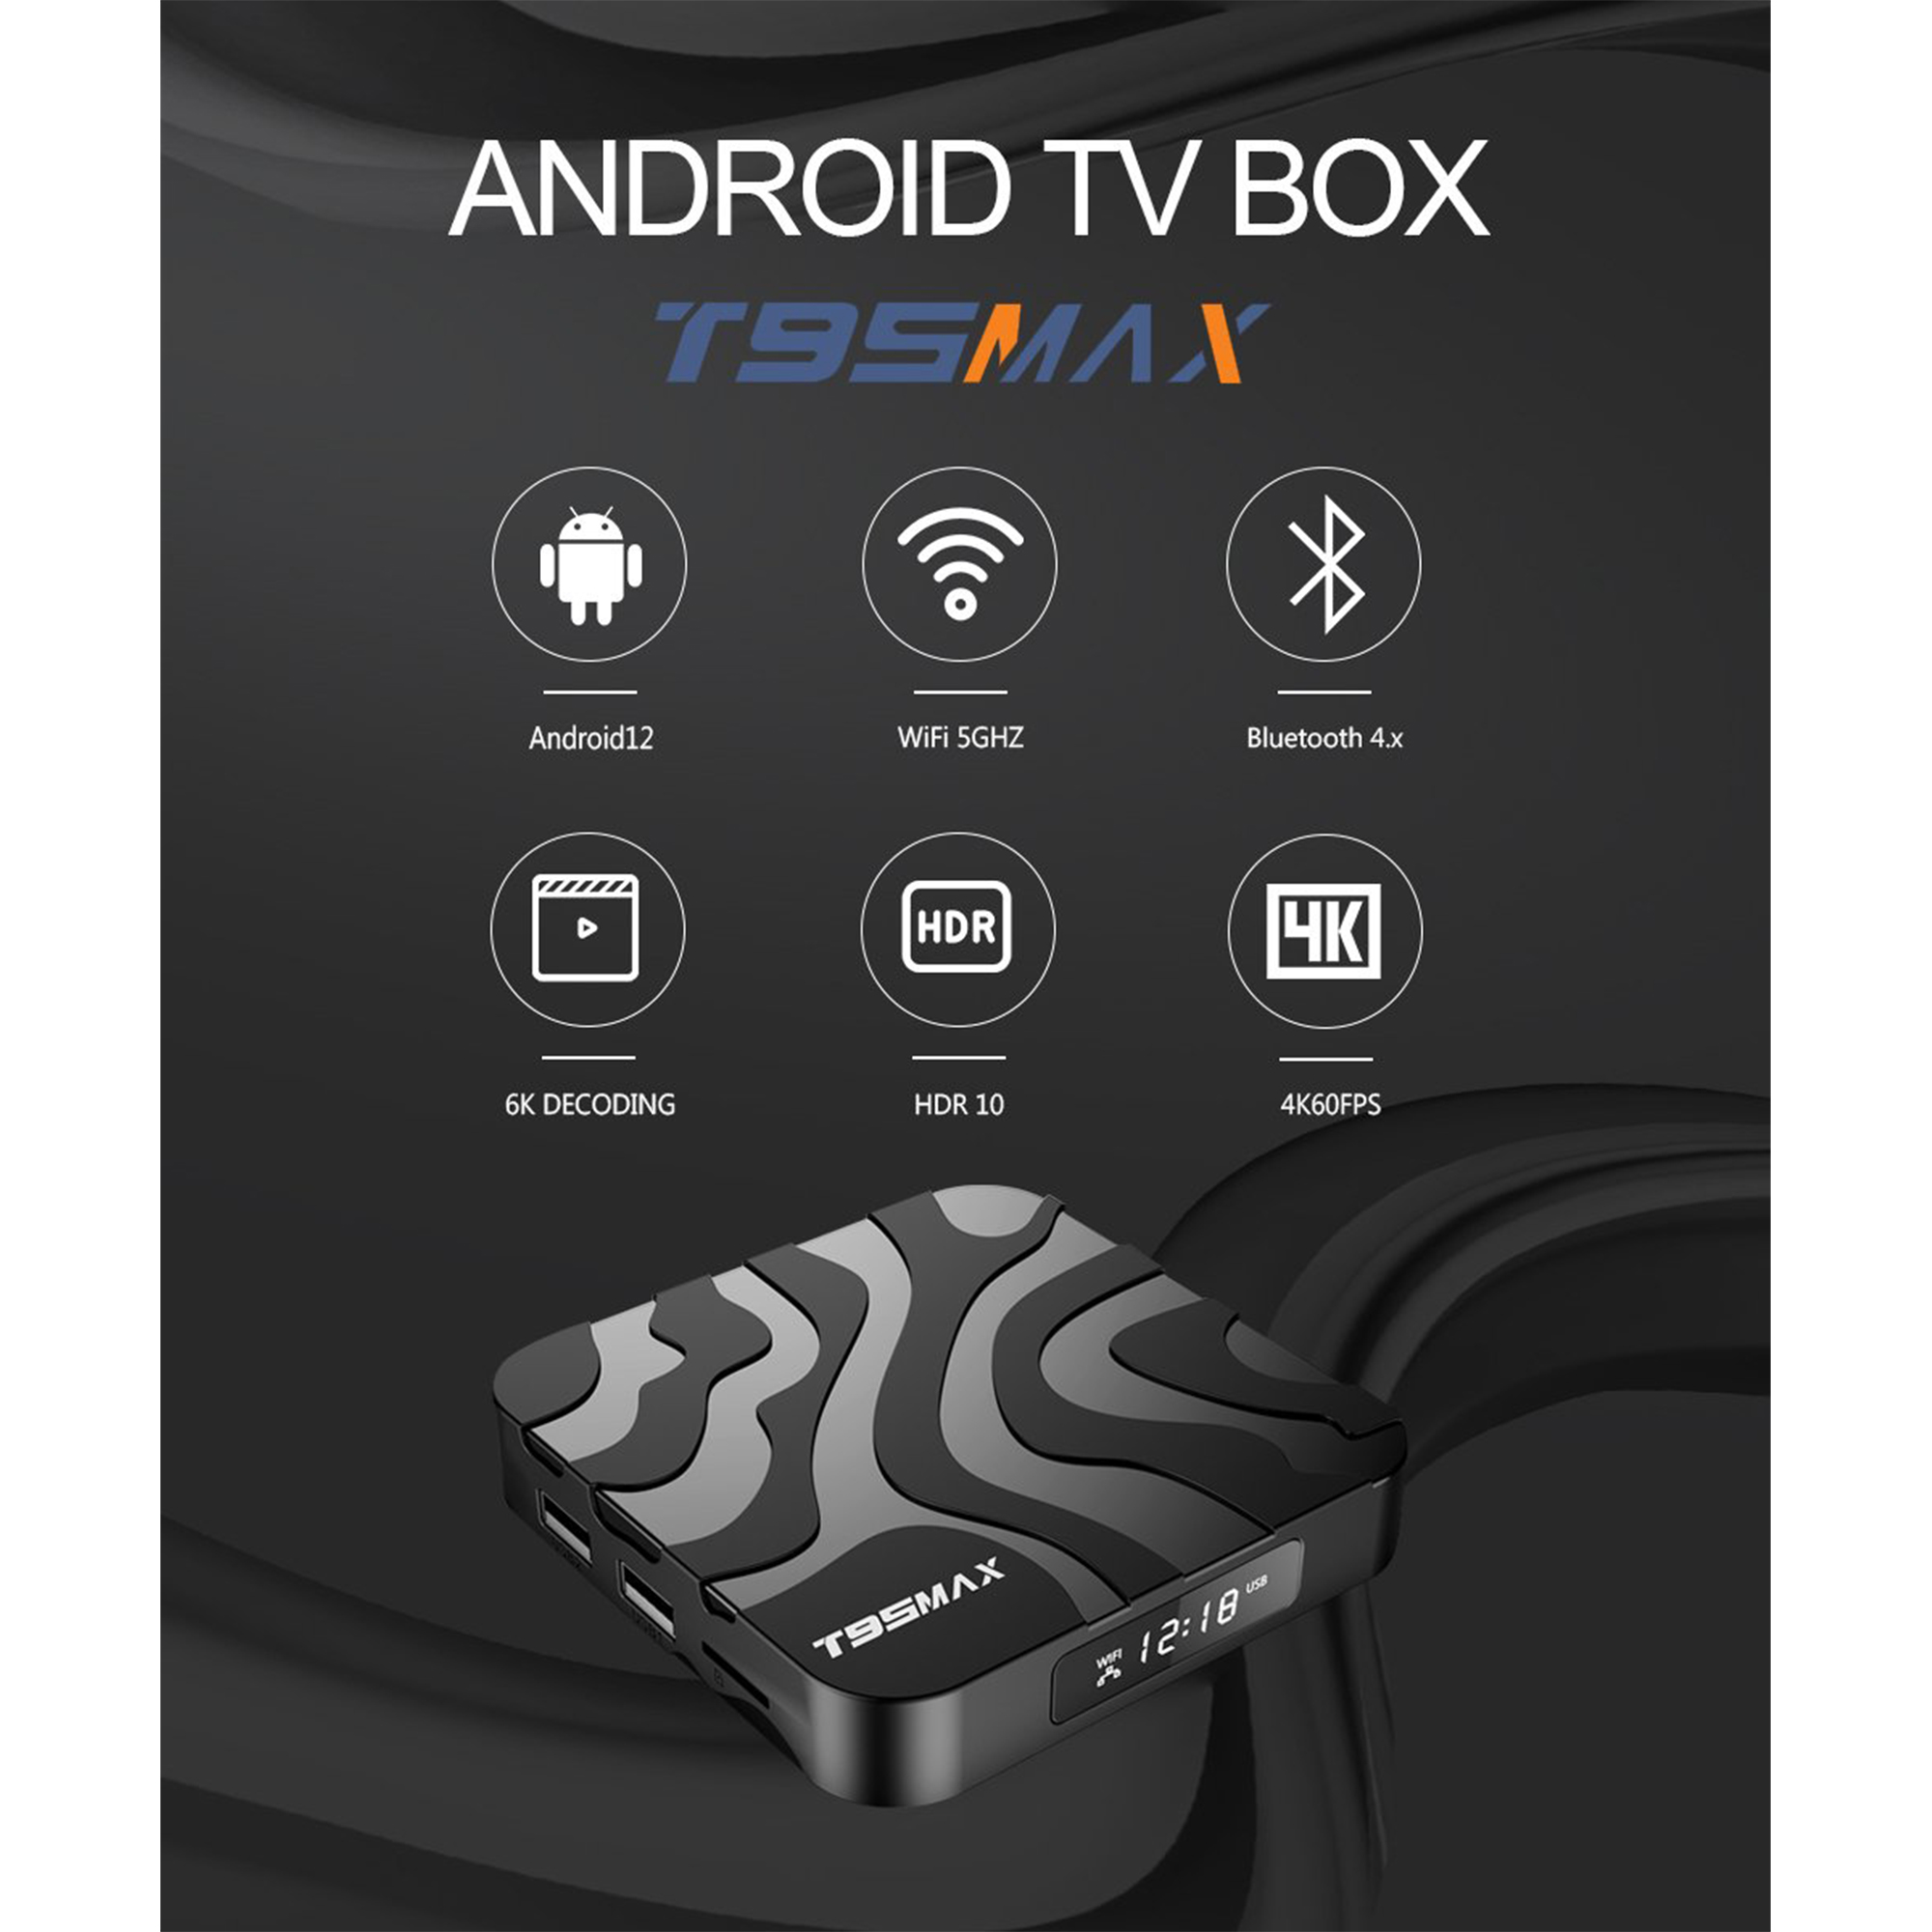 Multimedia Black LIPA Android GB 16 player, Tv T95 12 box Max Android